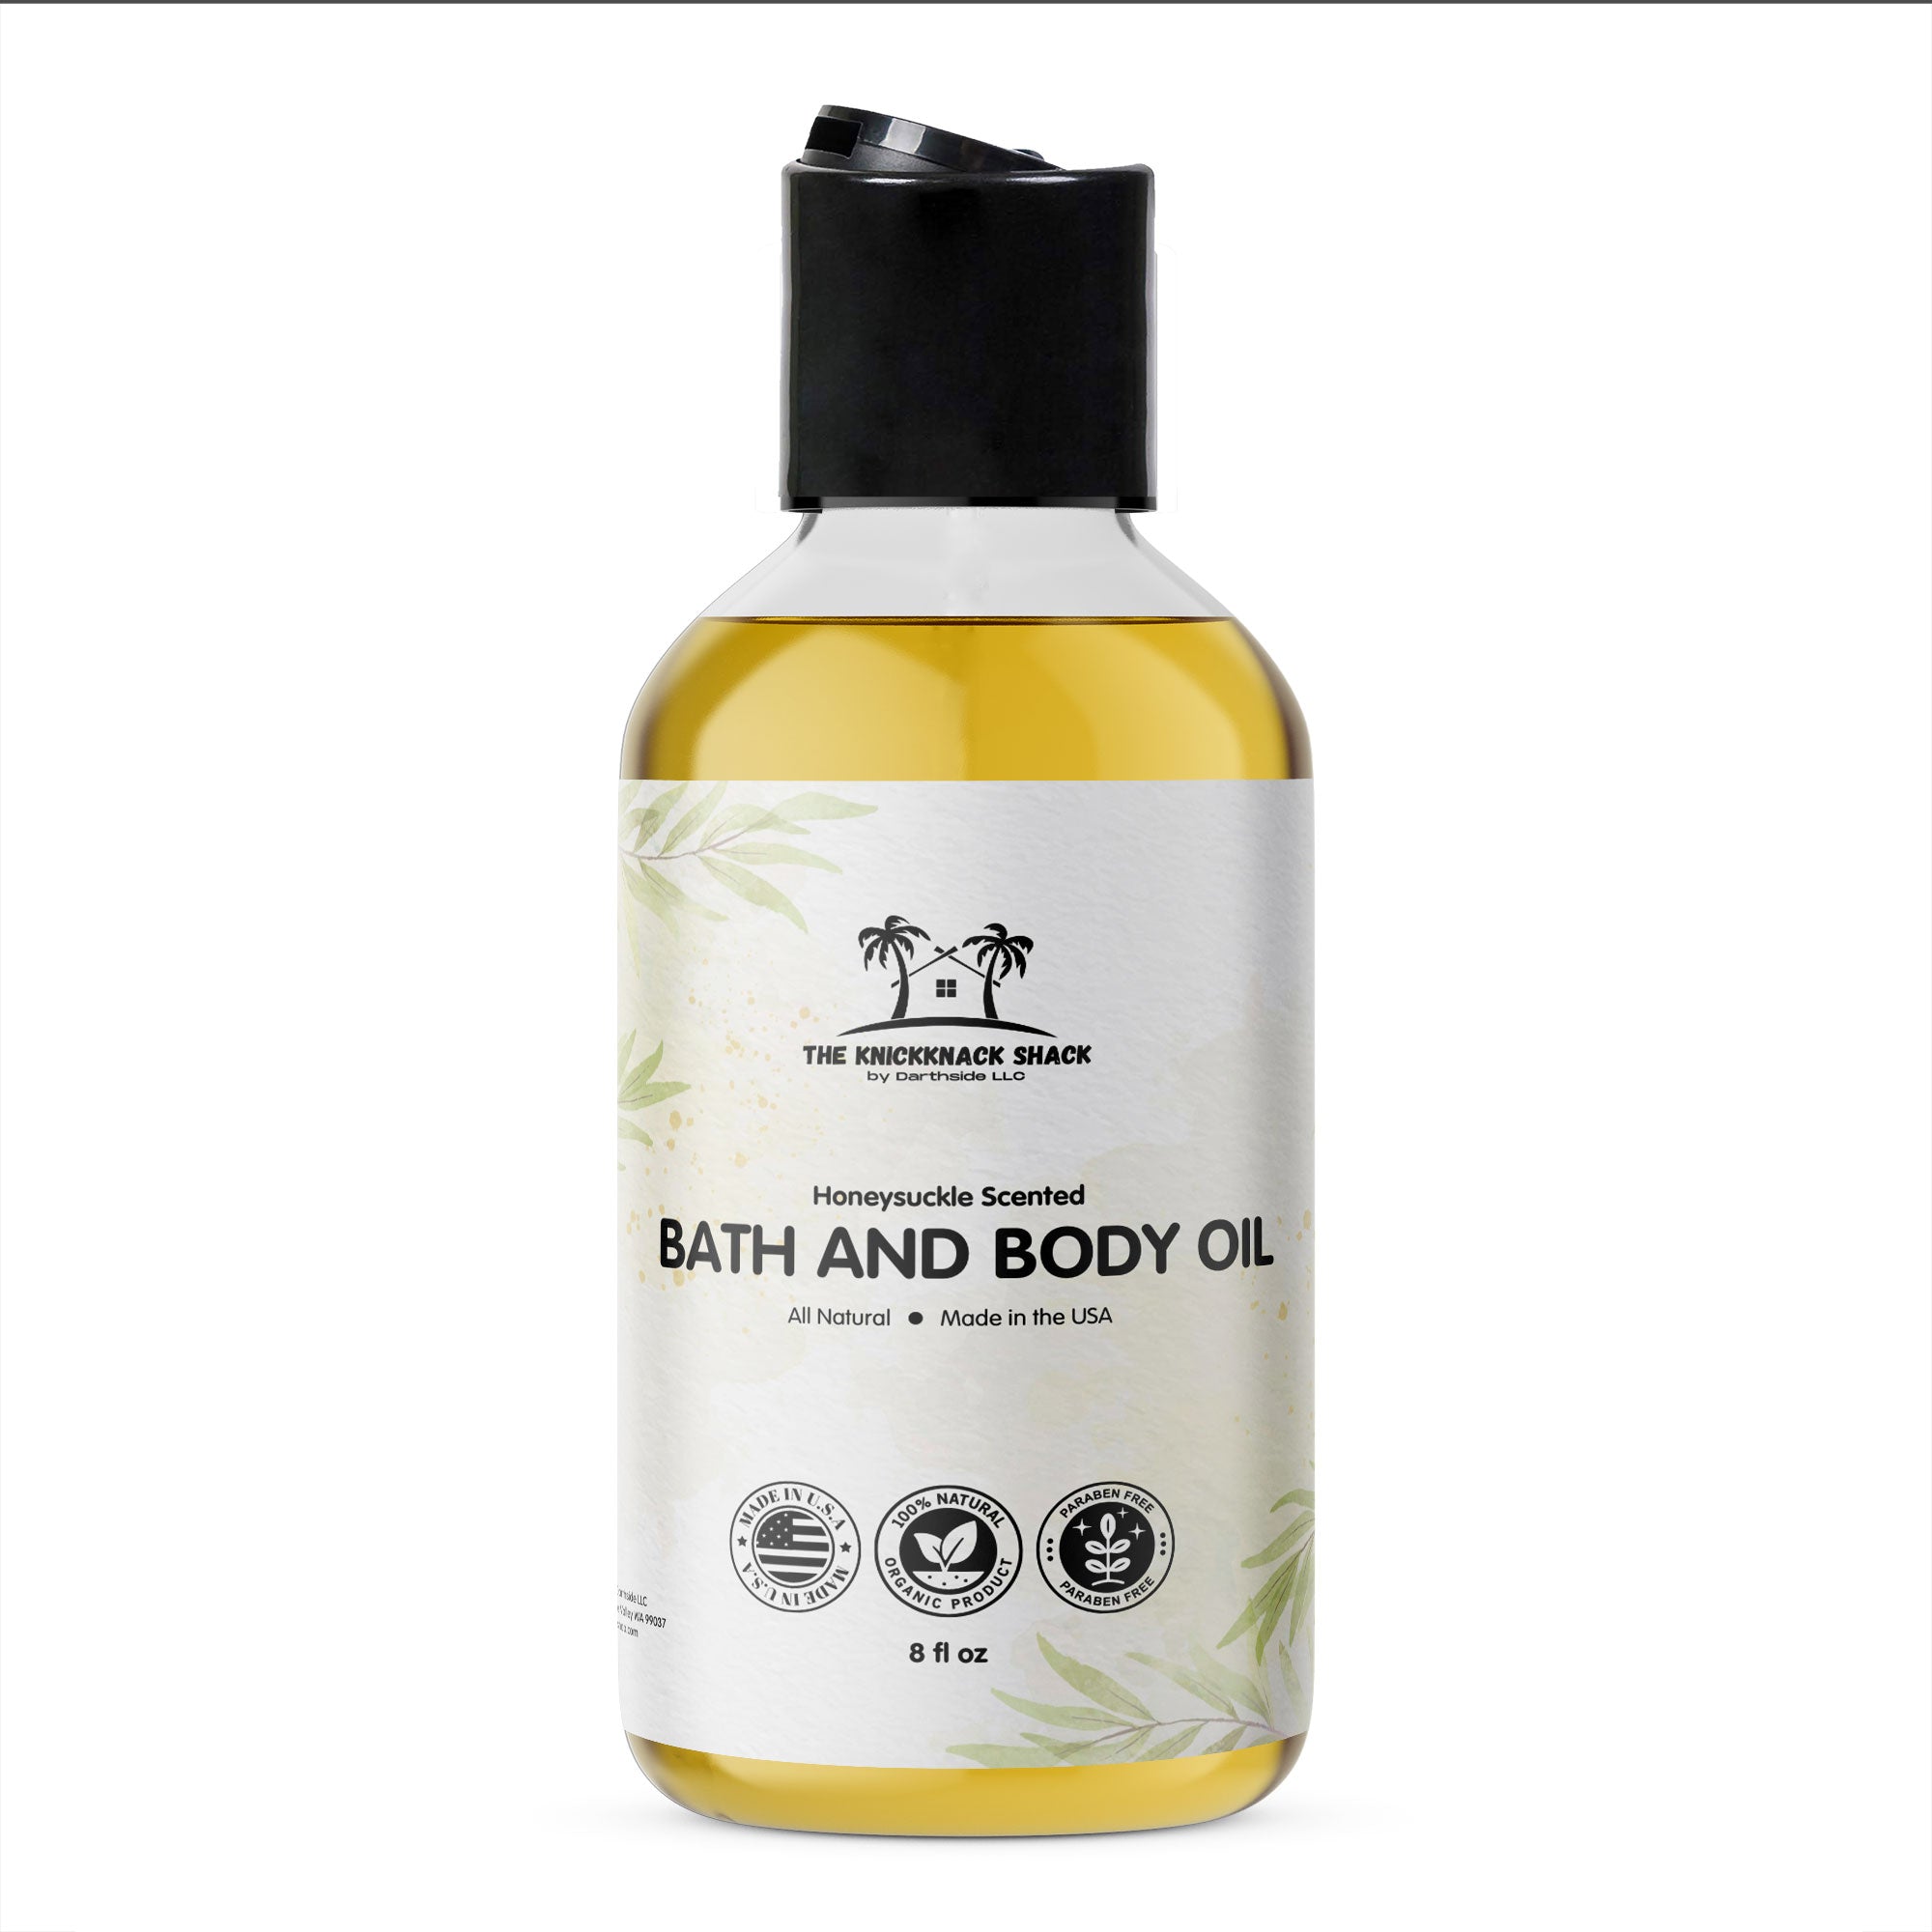 Honeysuckle Scented Bath and Body Oil